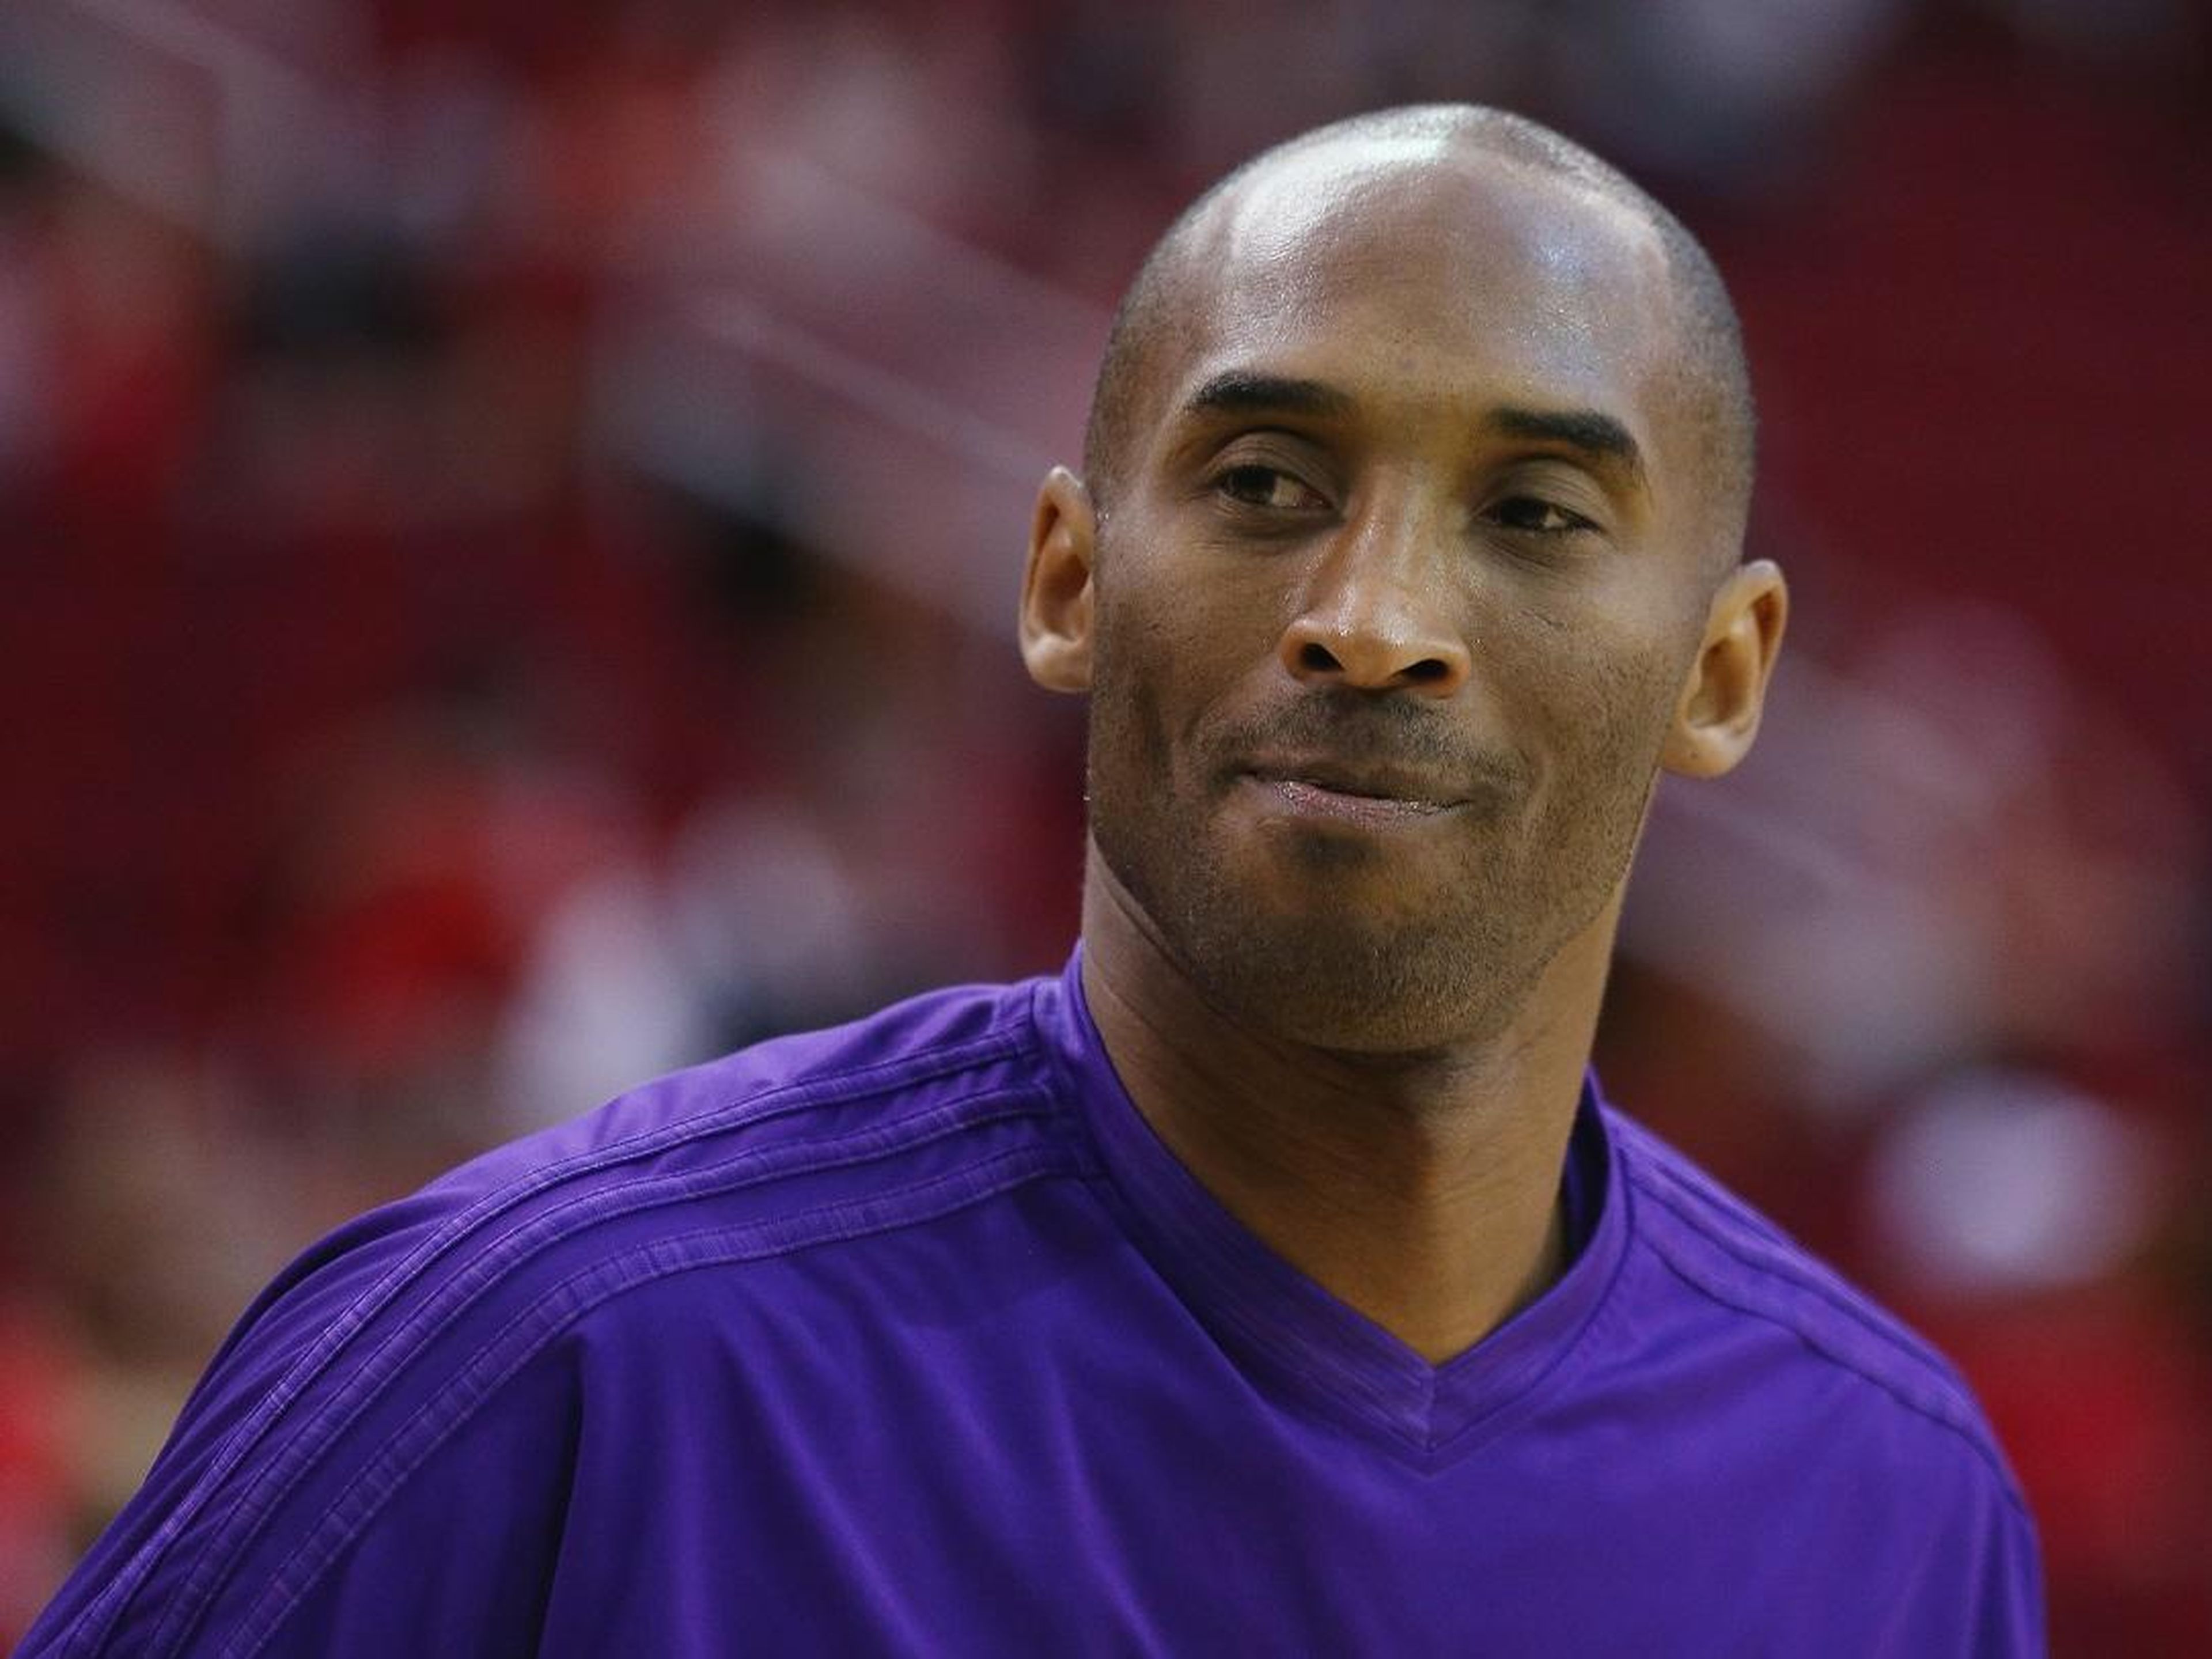 Kobe Bryant played for the Los Angeles Lakers for the entire duration of his NBA career.